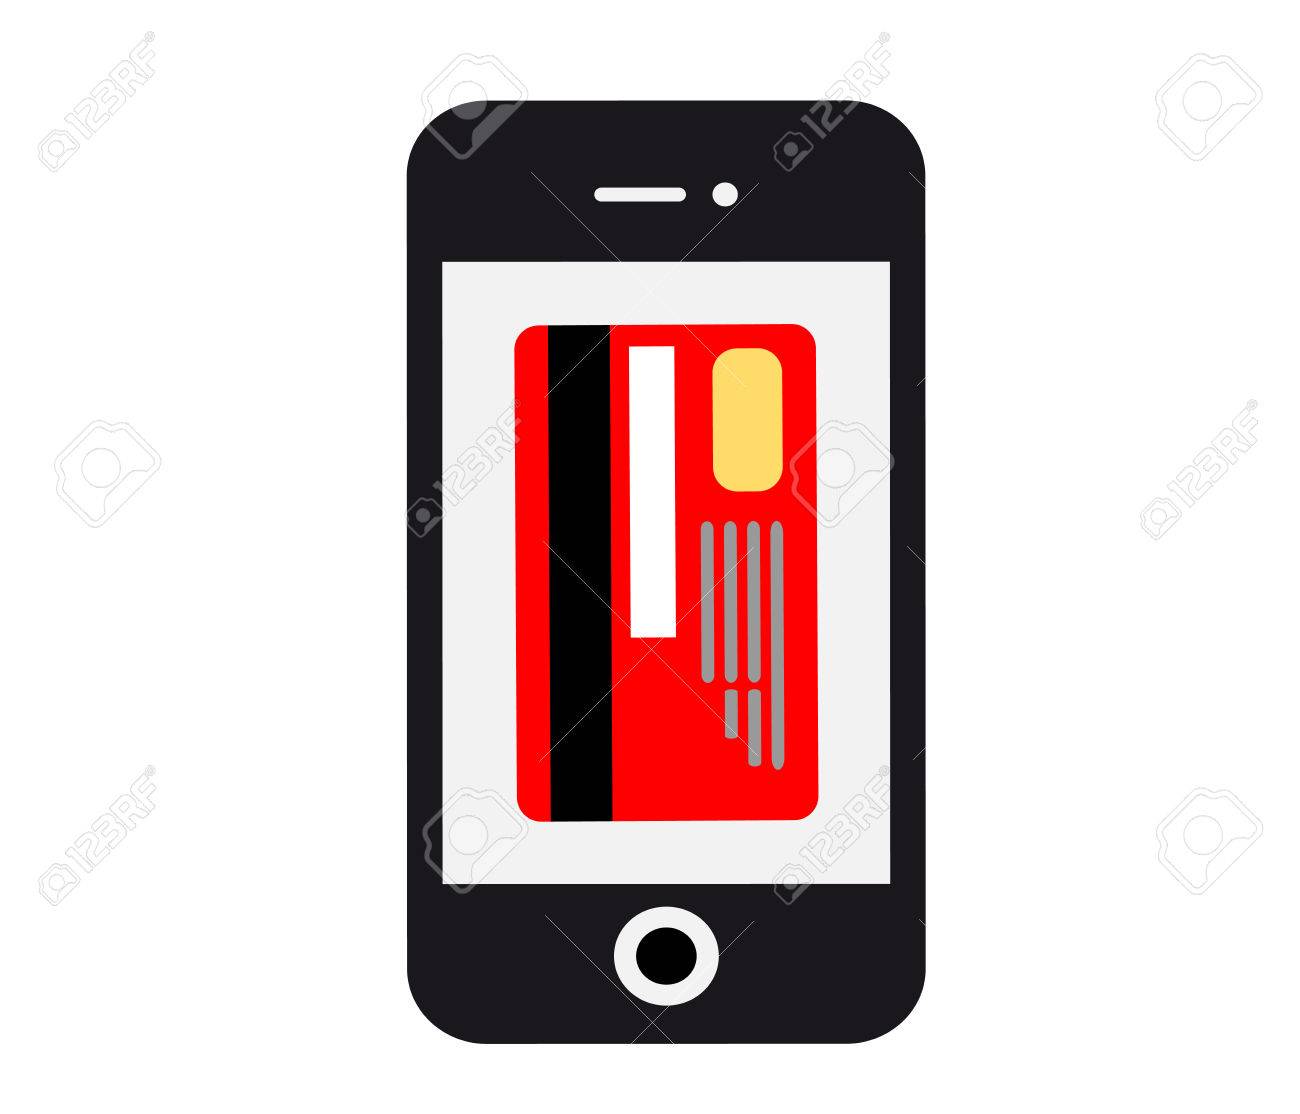 NFC Payment Icons - Download Free Vector Art, Stock Graphics  Images